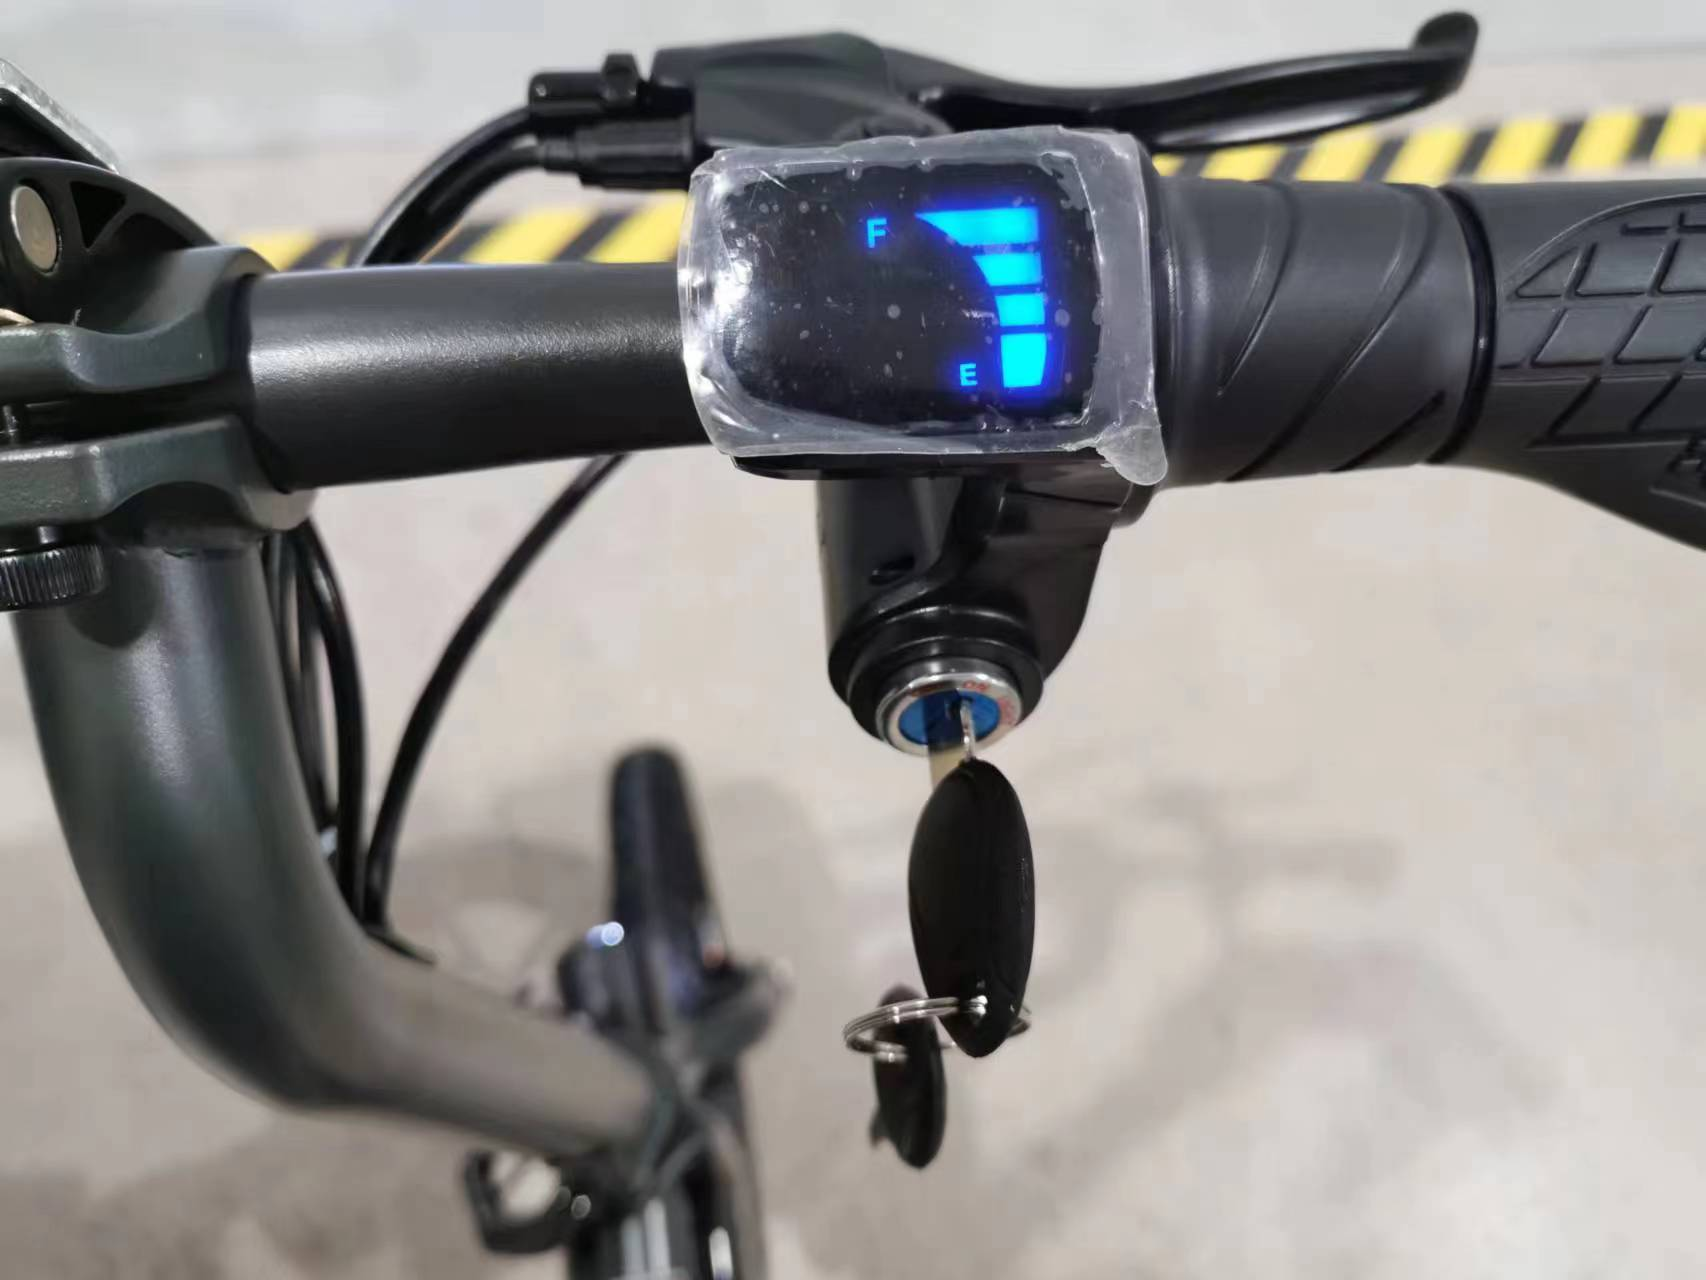 S2 Electric bike throttle set (throttle with display and lock)